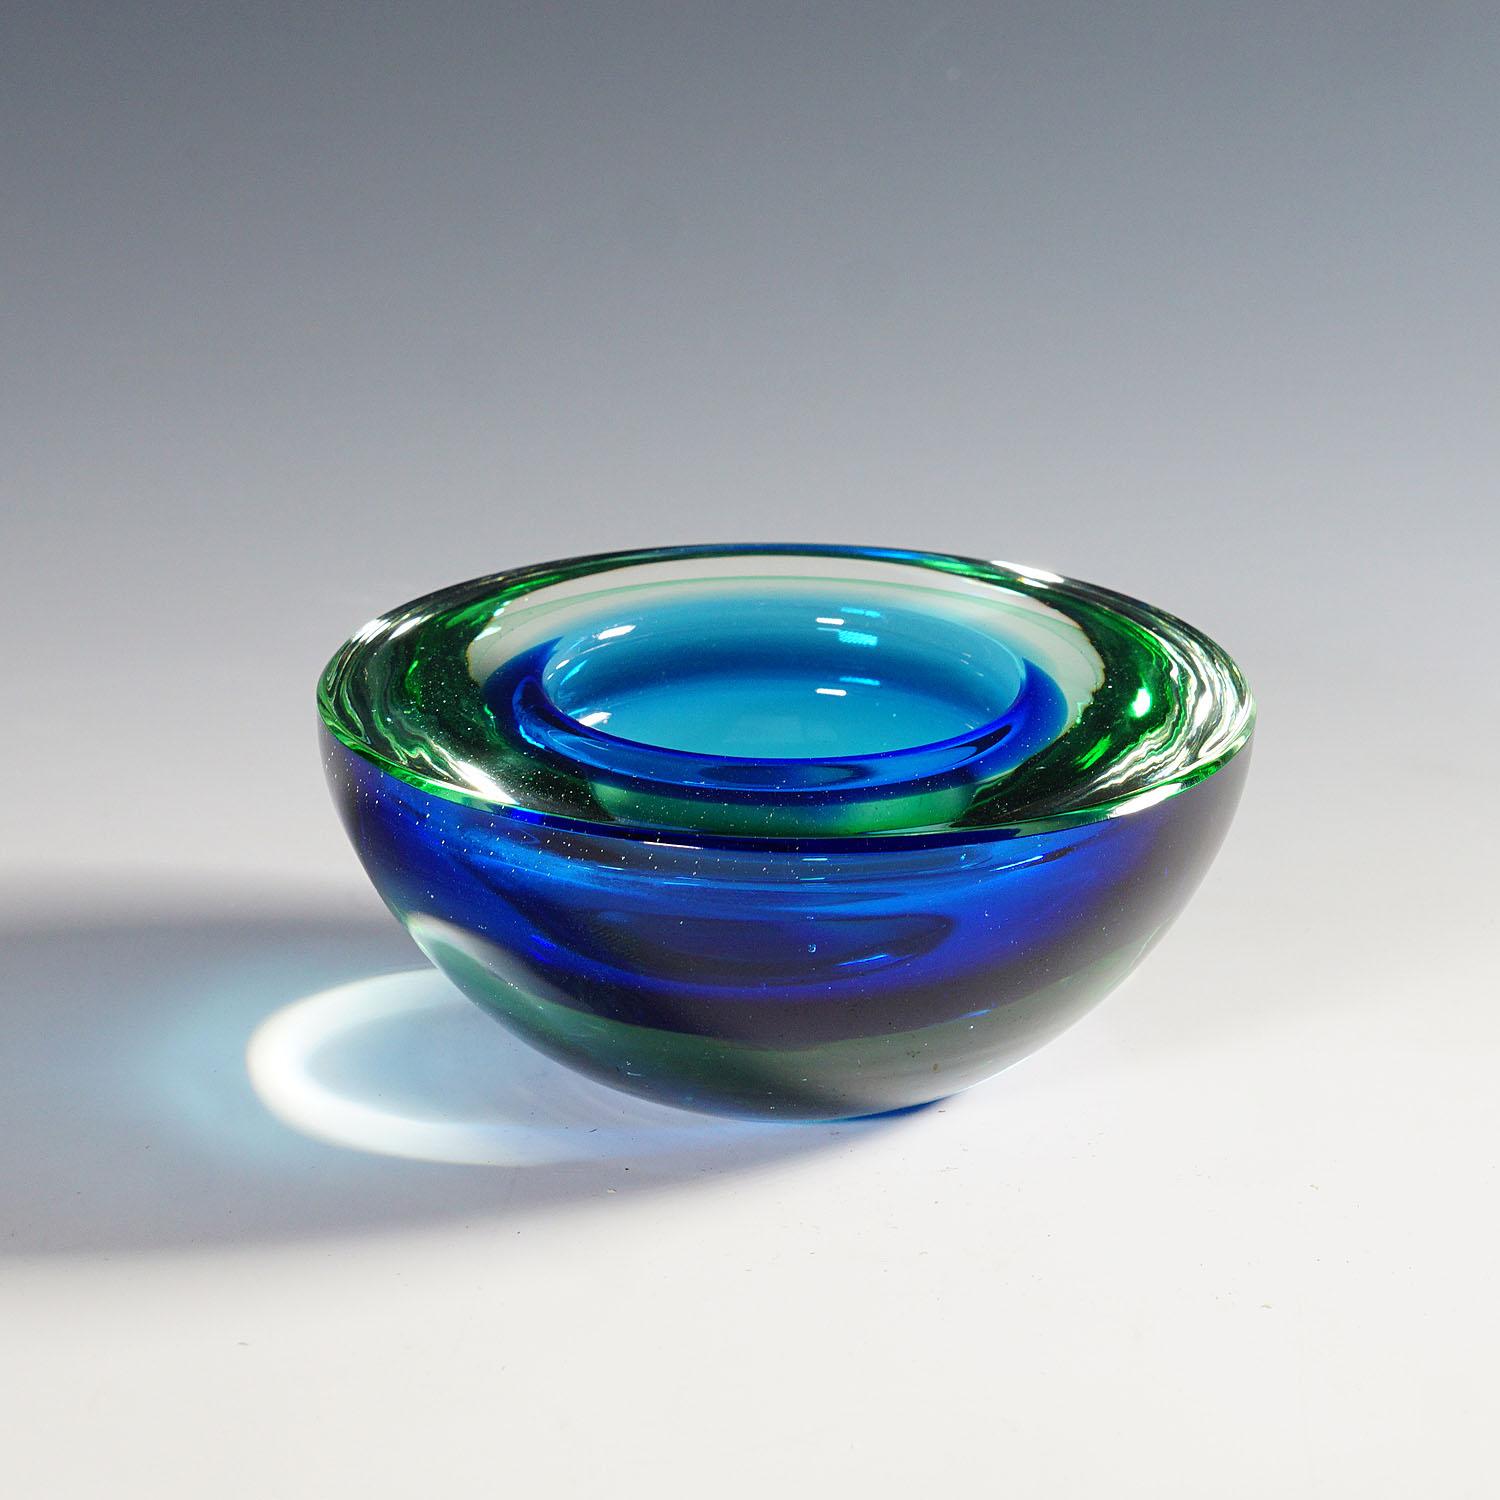 Italian Archimede Seguso Geode Bowl in Green and Blue, Murano Italy Ca. 1950s For Sale